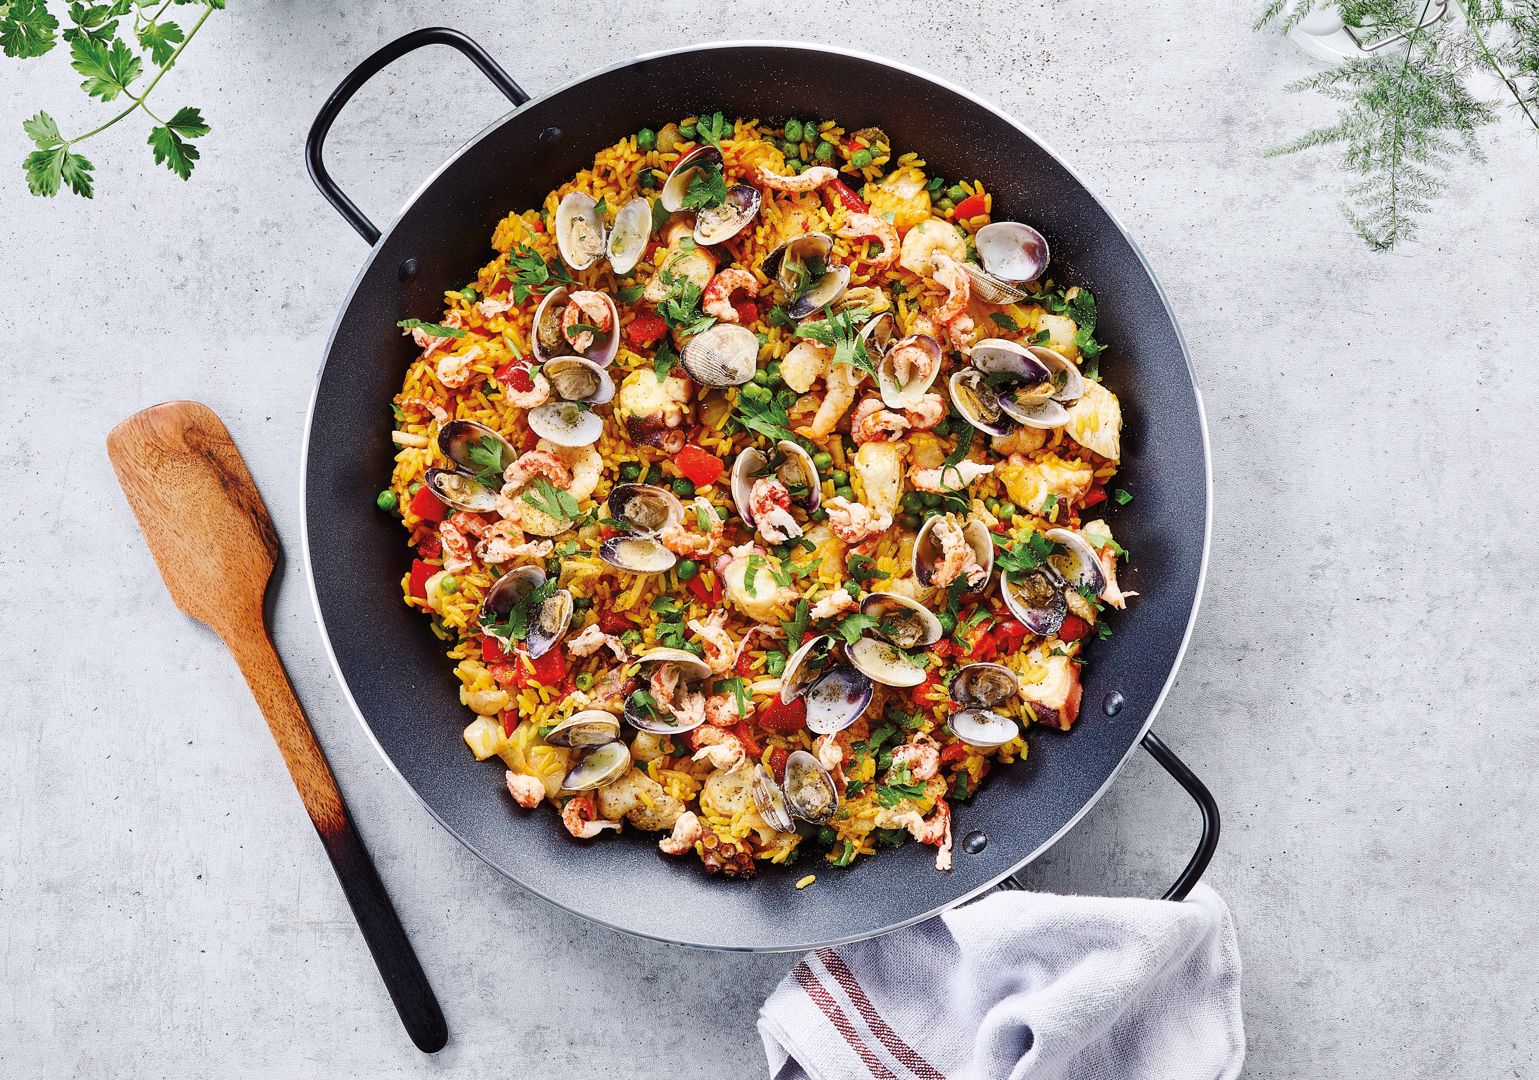 Create a Spanish atmosphere in your home with our paella recipe